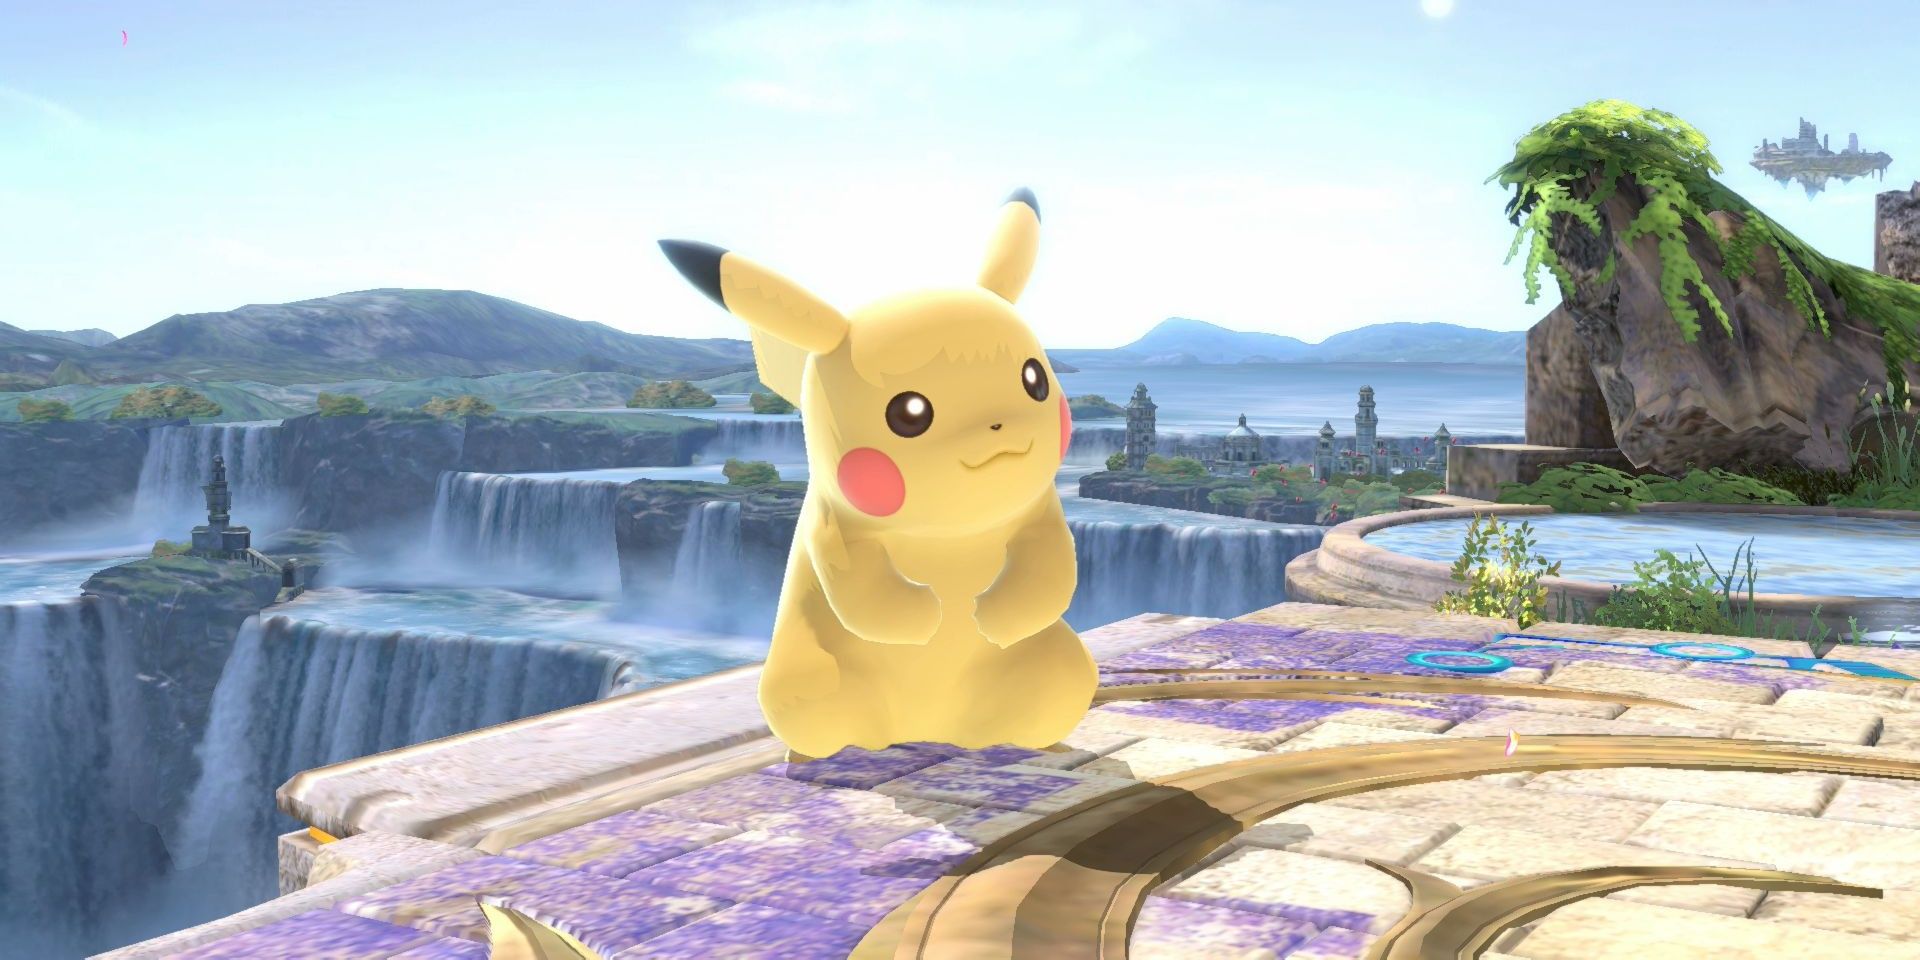 Pikachu standing on map in Super Smash Bros. Ultimate